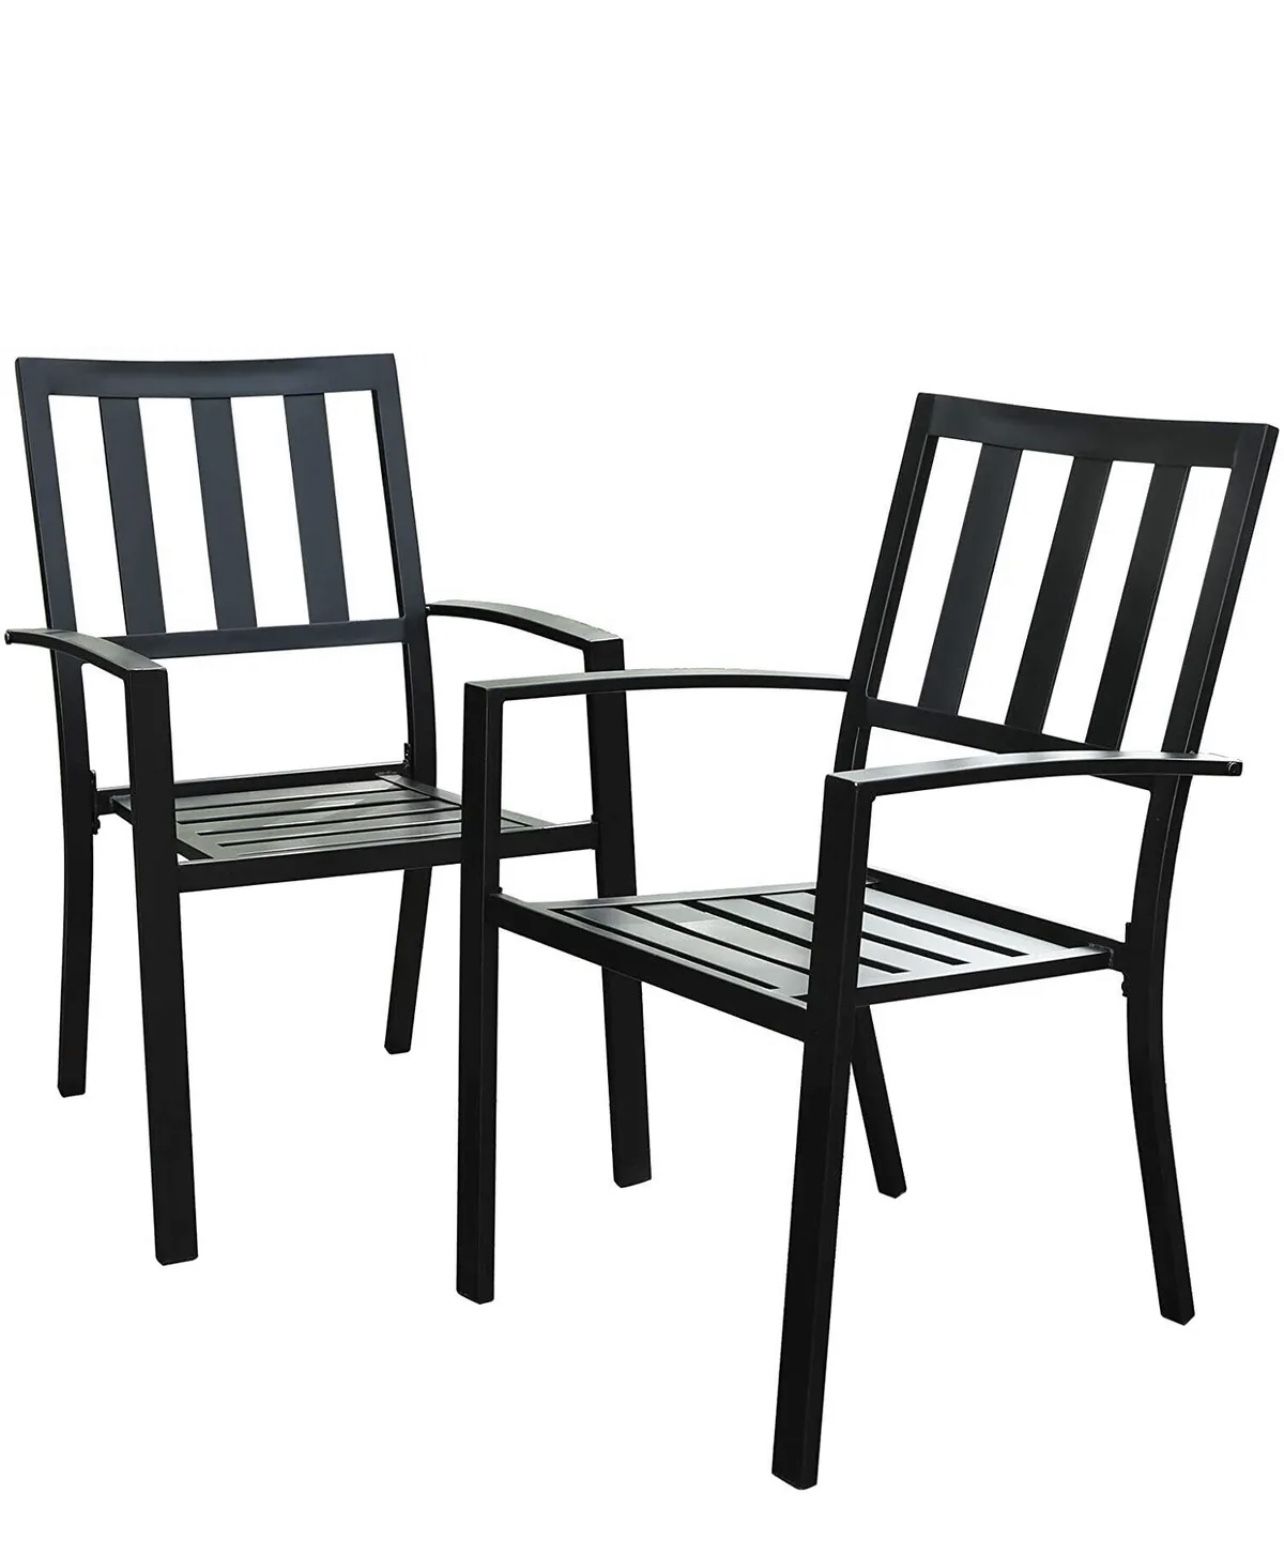 PHI VILLA Patio ChairSet of 2 Stackable Outdoor Dining Chairs Metal Armchair New